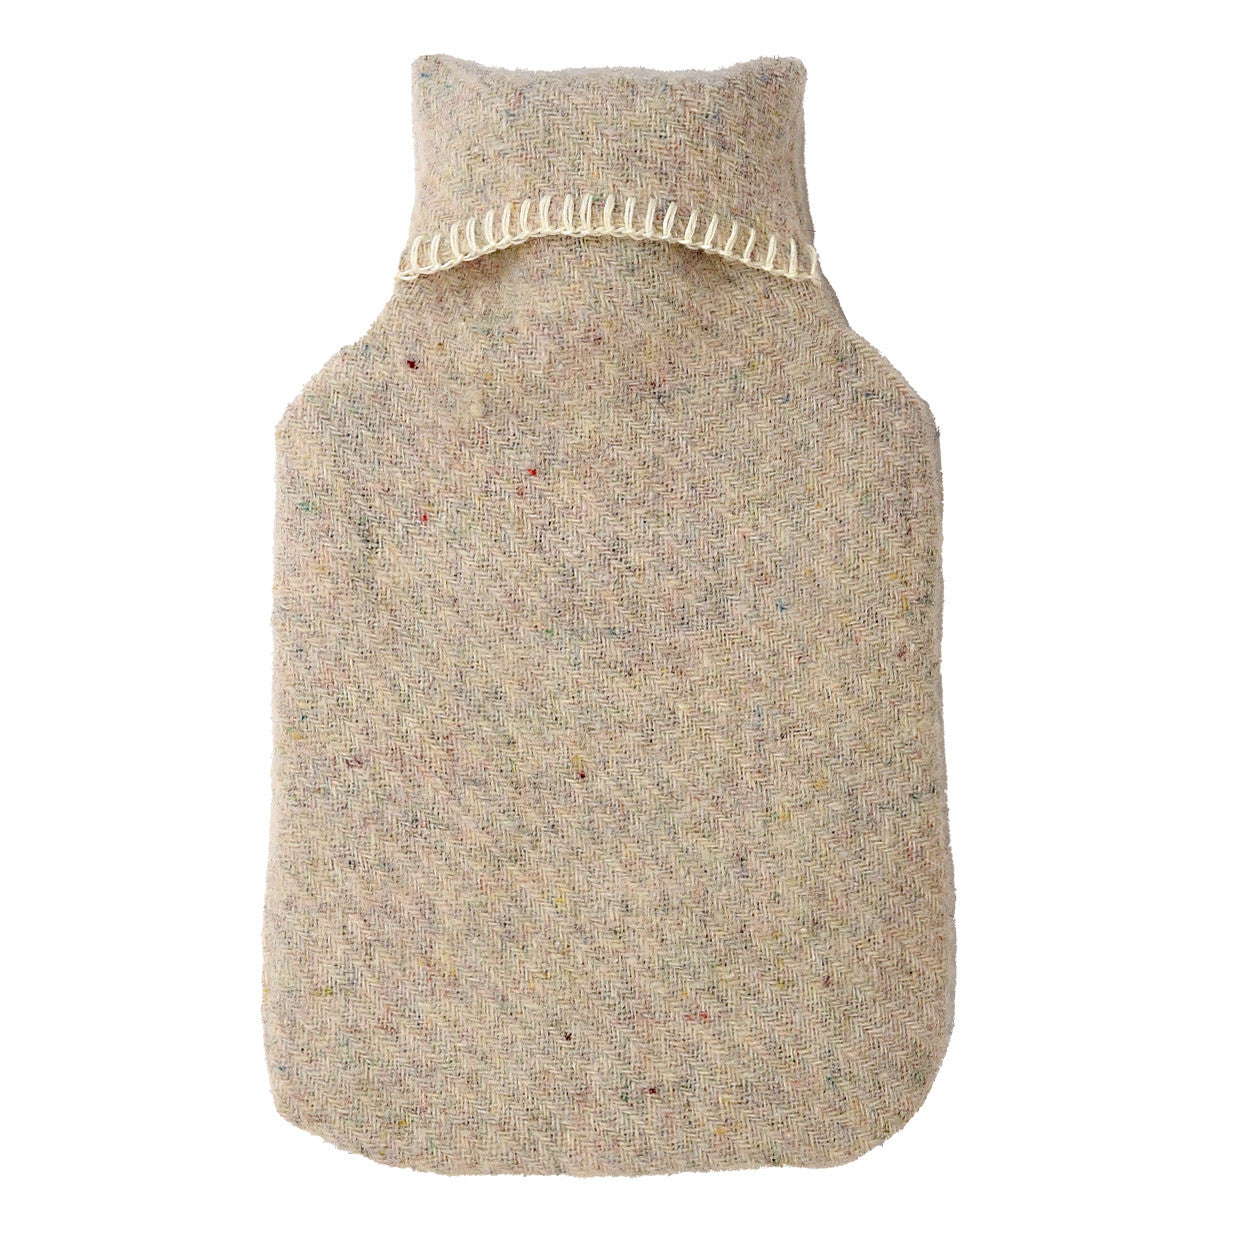 Tweedmill - Recycled wool hot water bottle | hot water bottle with hot water bottle bag